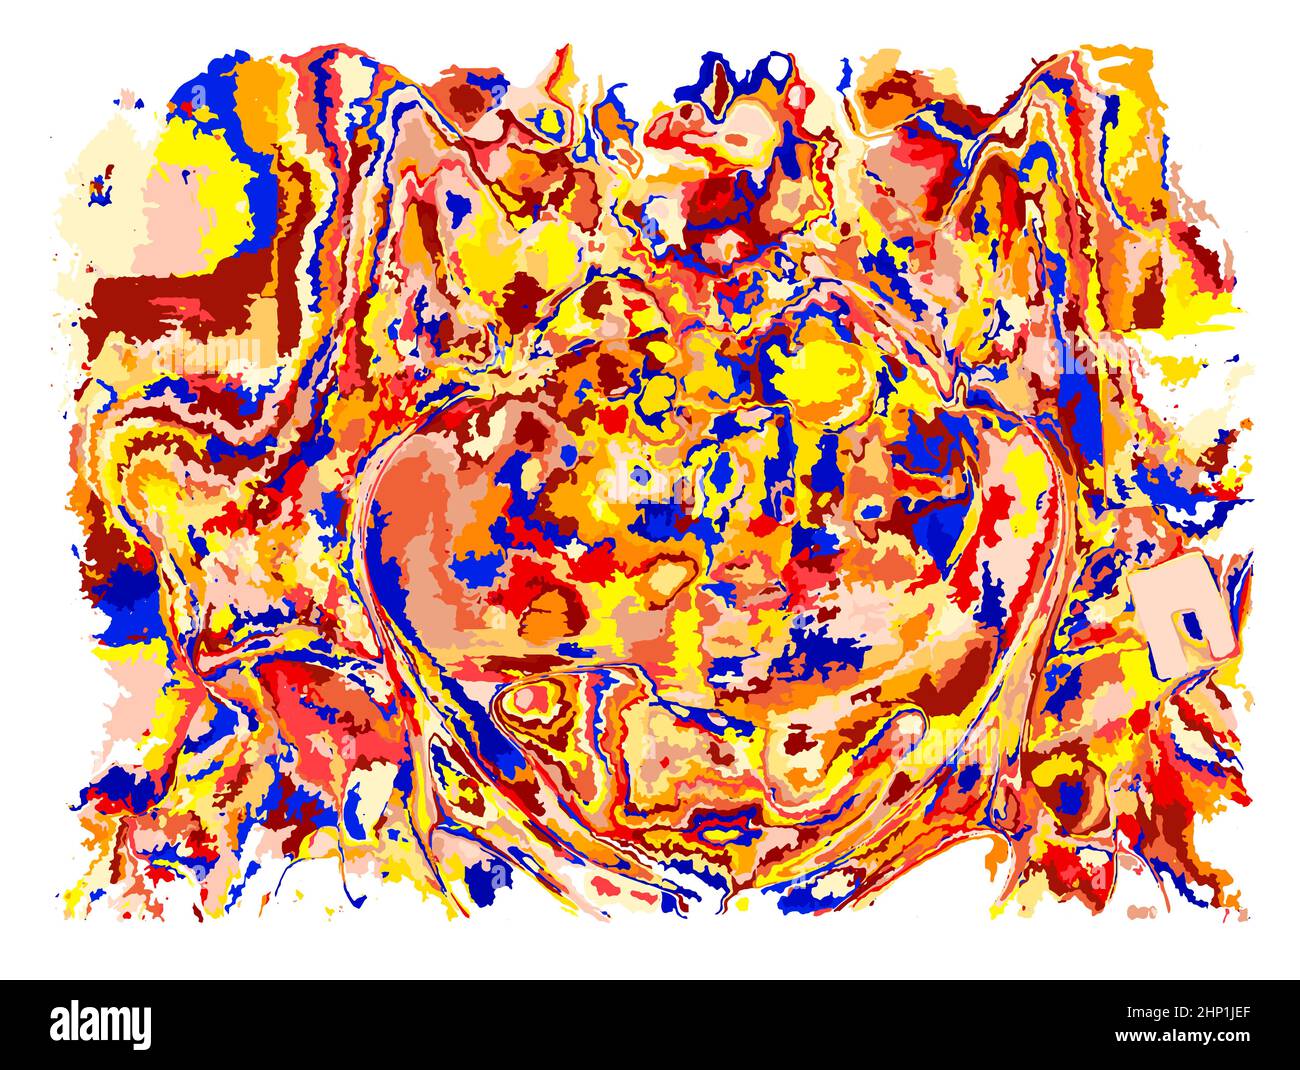 Liquid art, abstract colored chaotic smears painting, flowing colorful ink. Contemporary graphic concept for NFT digital gallery. Vector illustration Stock Vector